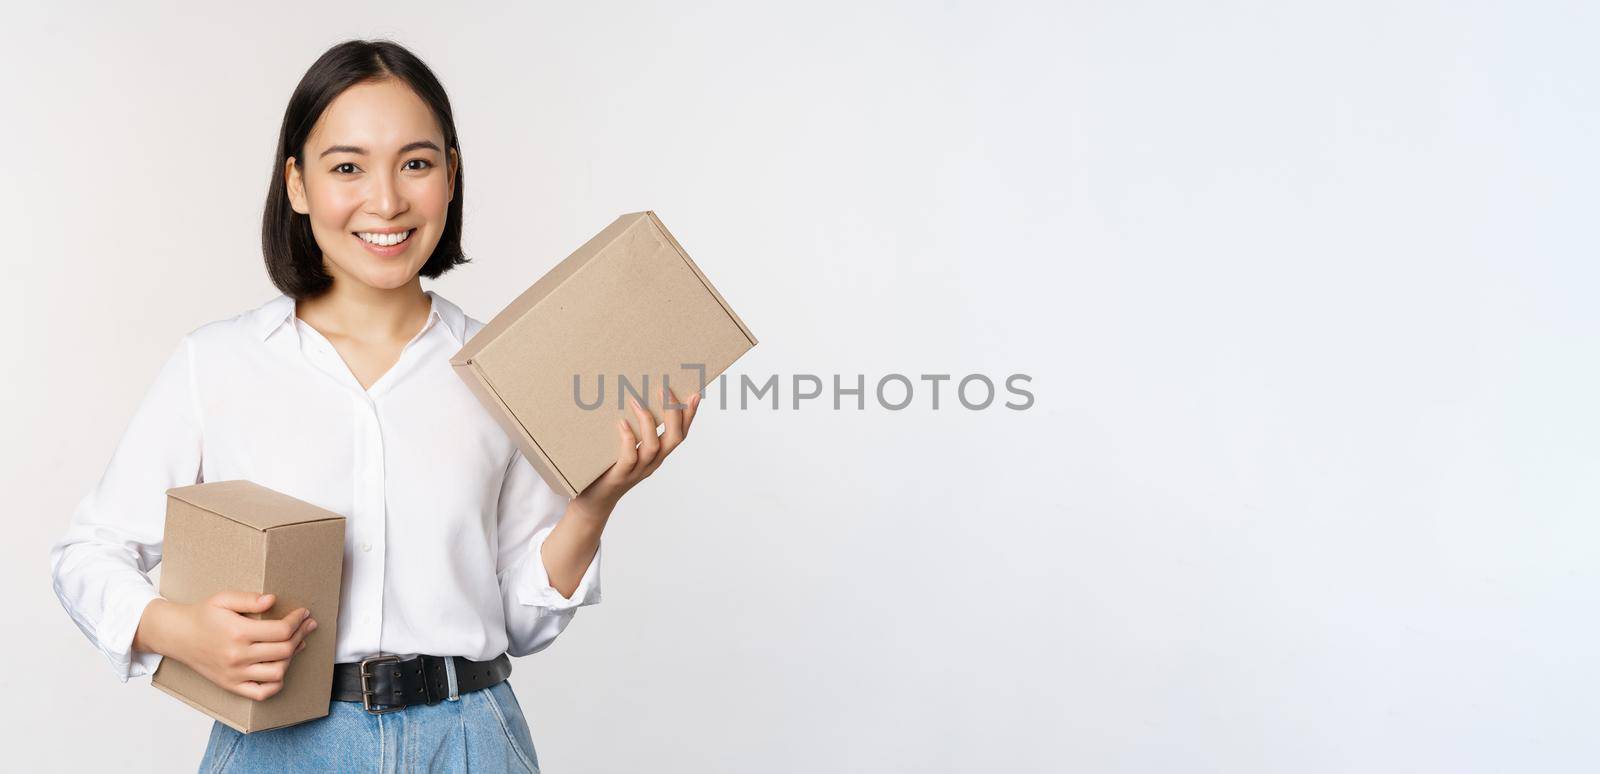 Concept of shopping and delivery. Young happy asian woman posing with boxes and smiling, standing over white background.